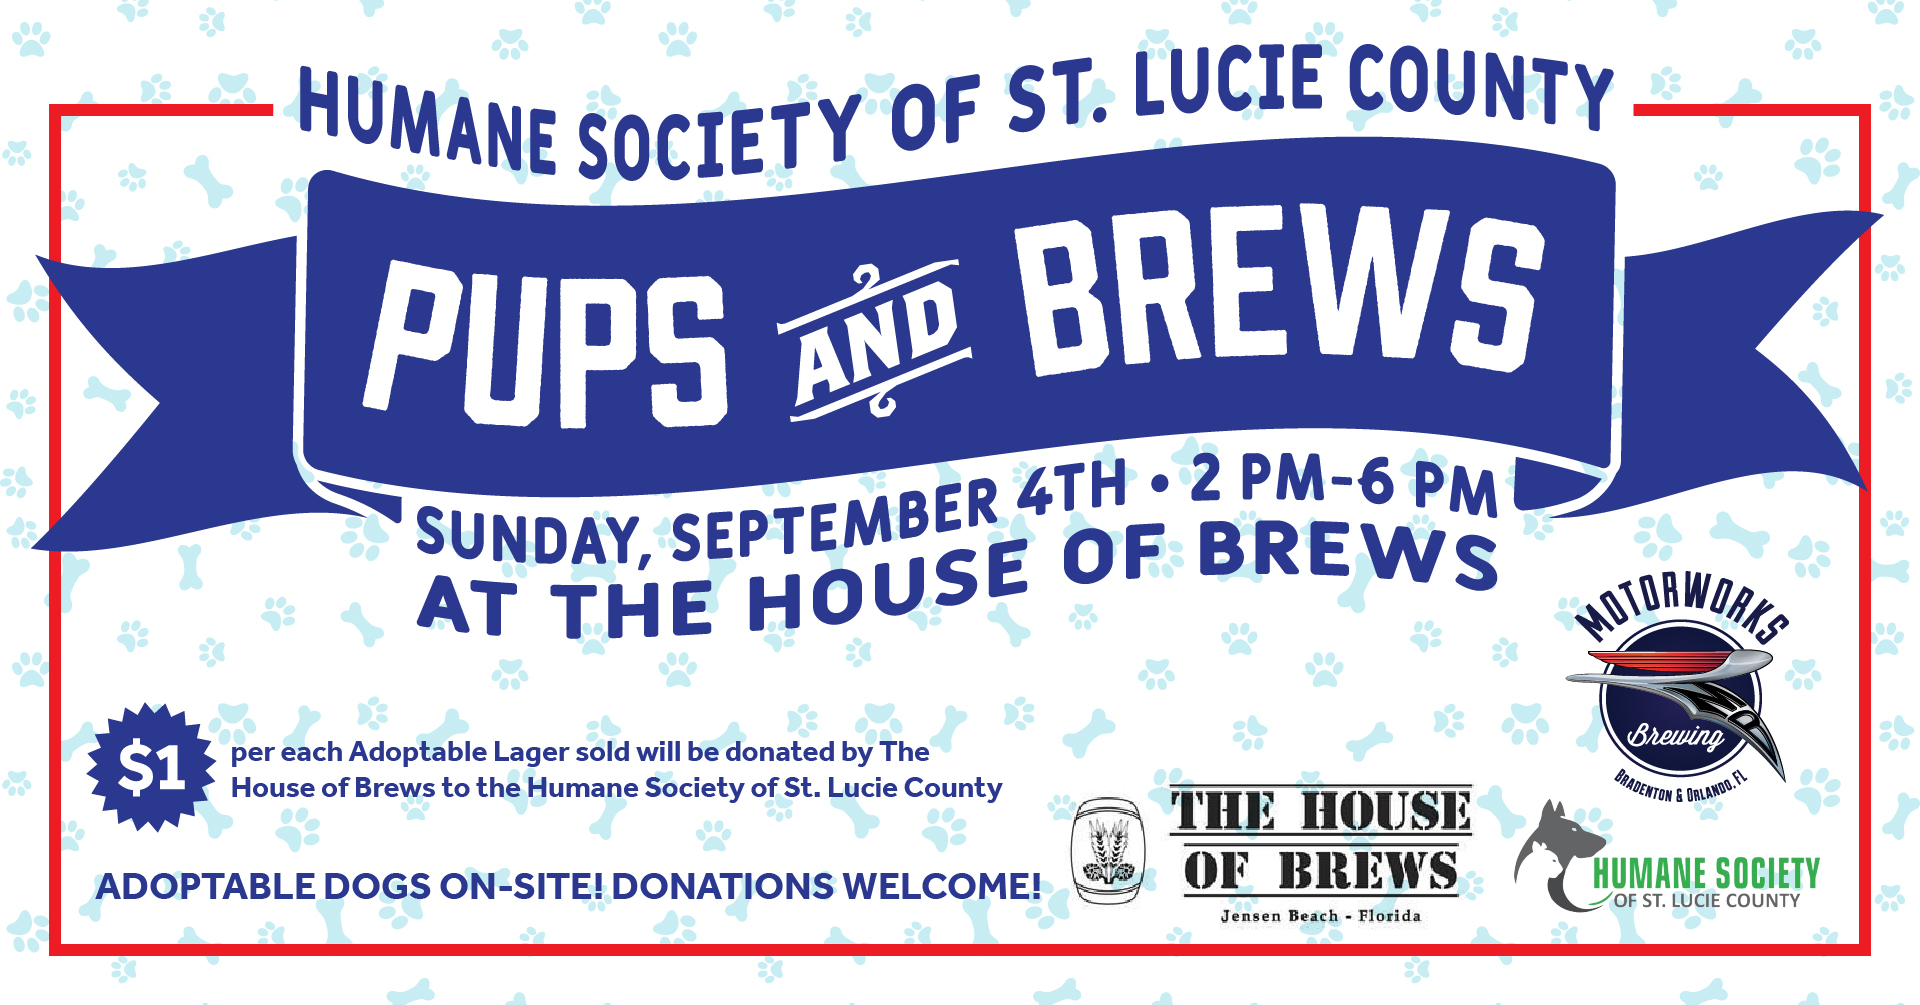 Pups & Brews event in Jensen Beach for the Humane Society of St. Lucie County